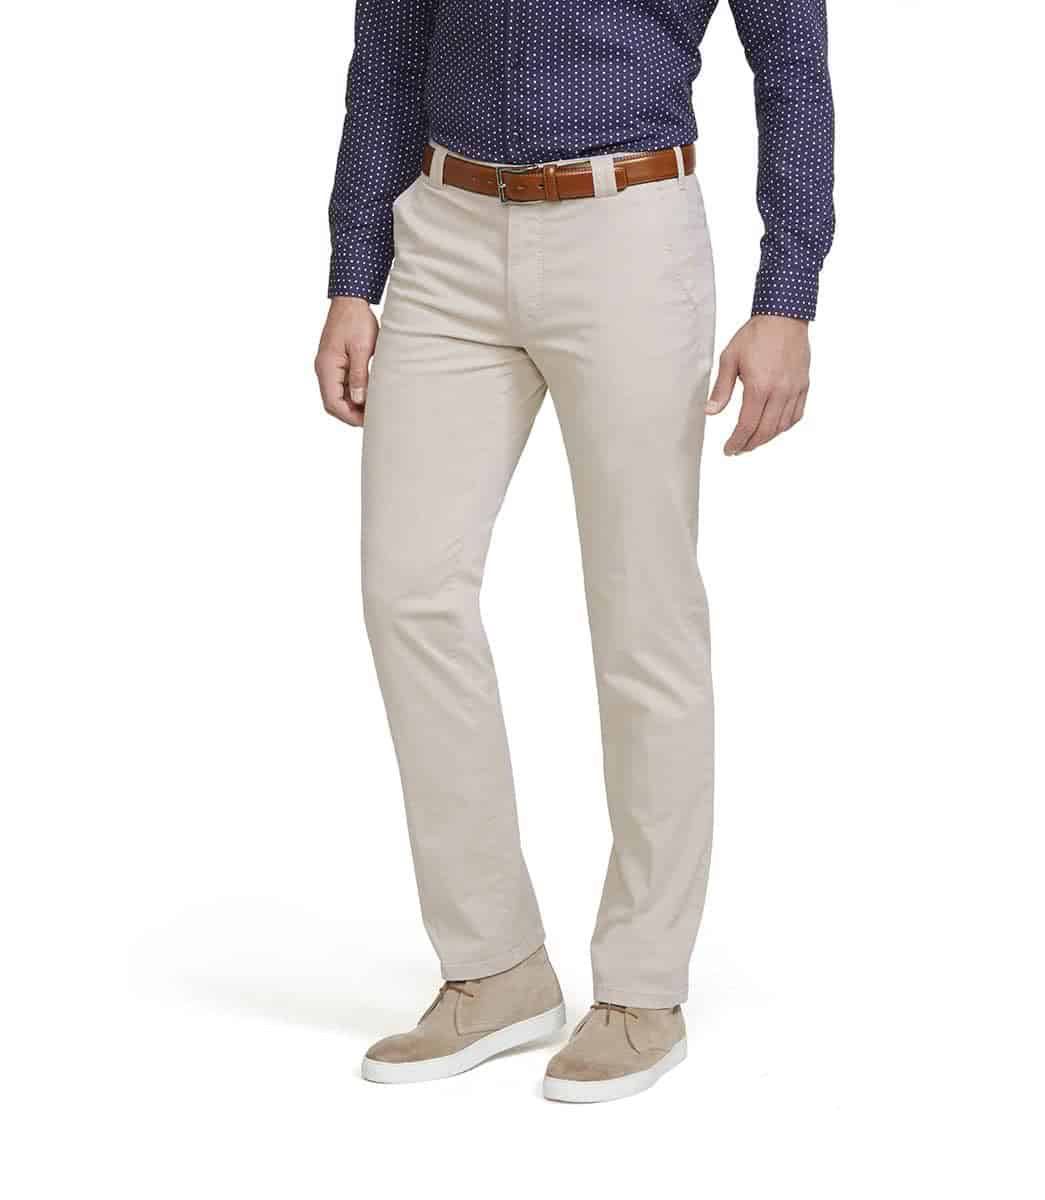 Stone Fairtrade Cotton Stretch Chinos by Smart Clothes York Yorkshire